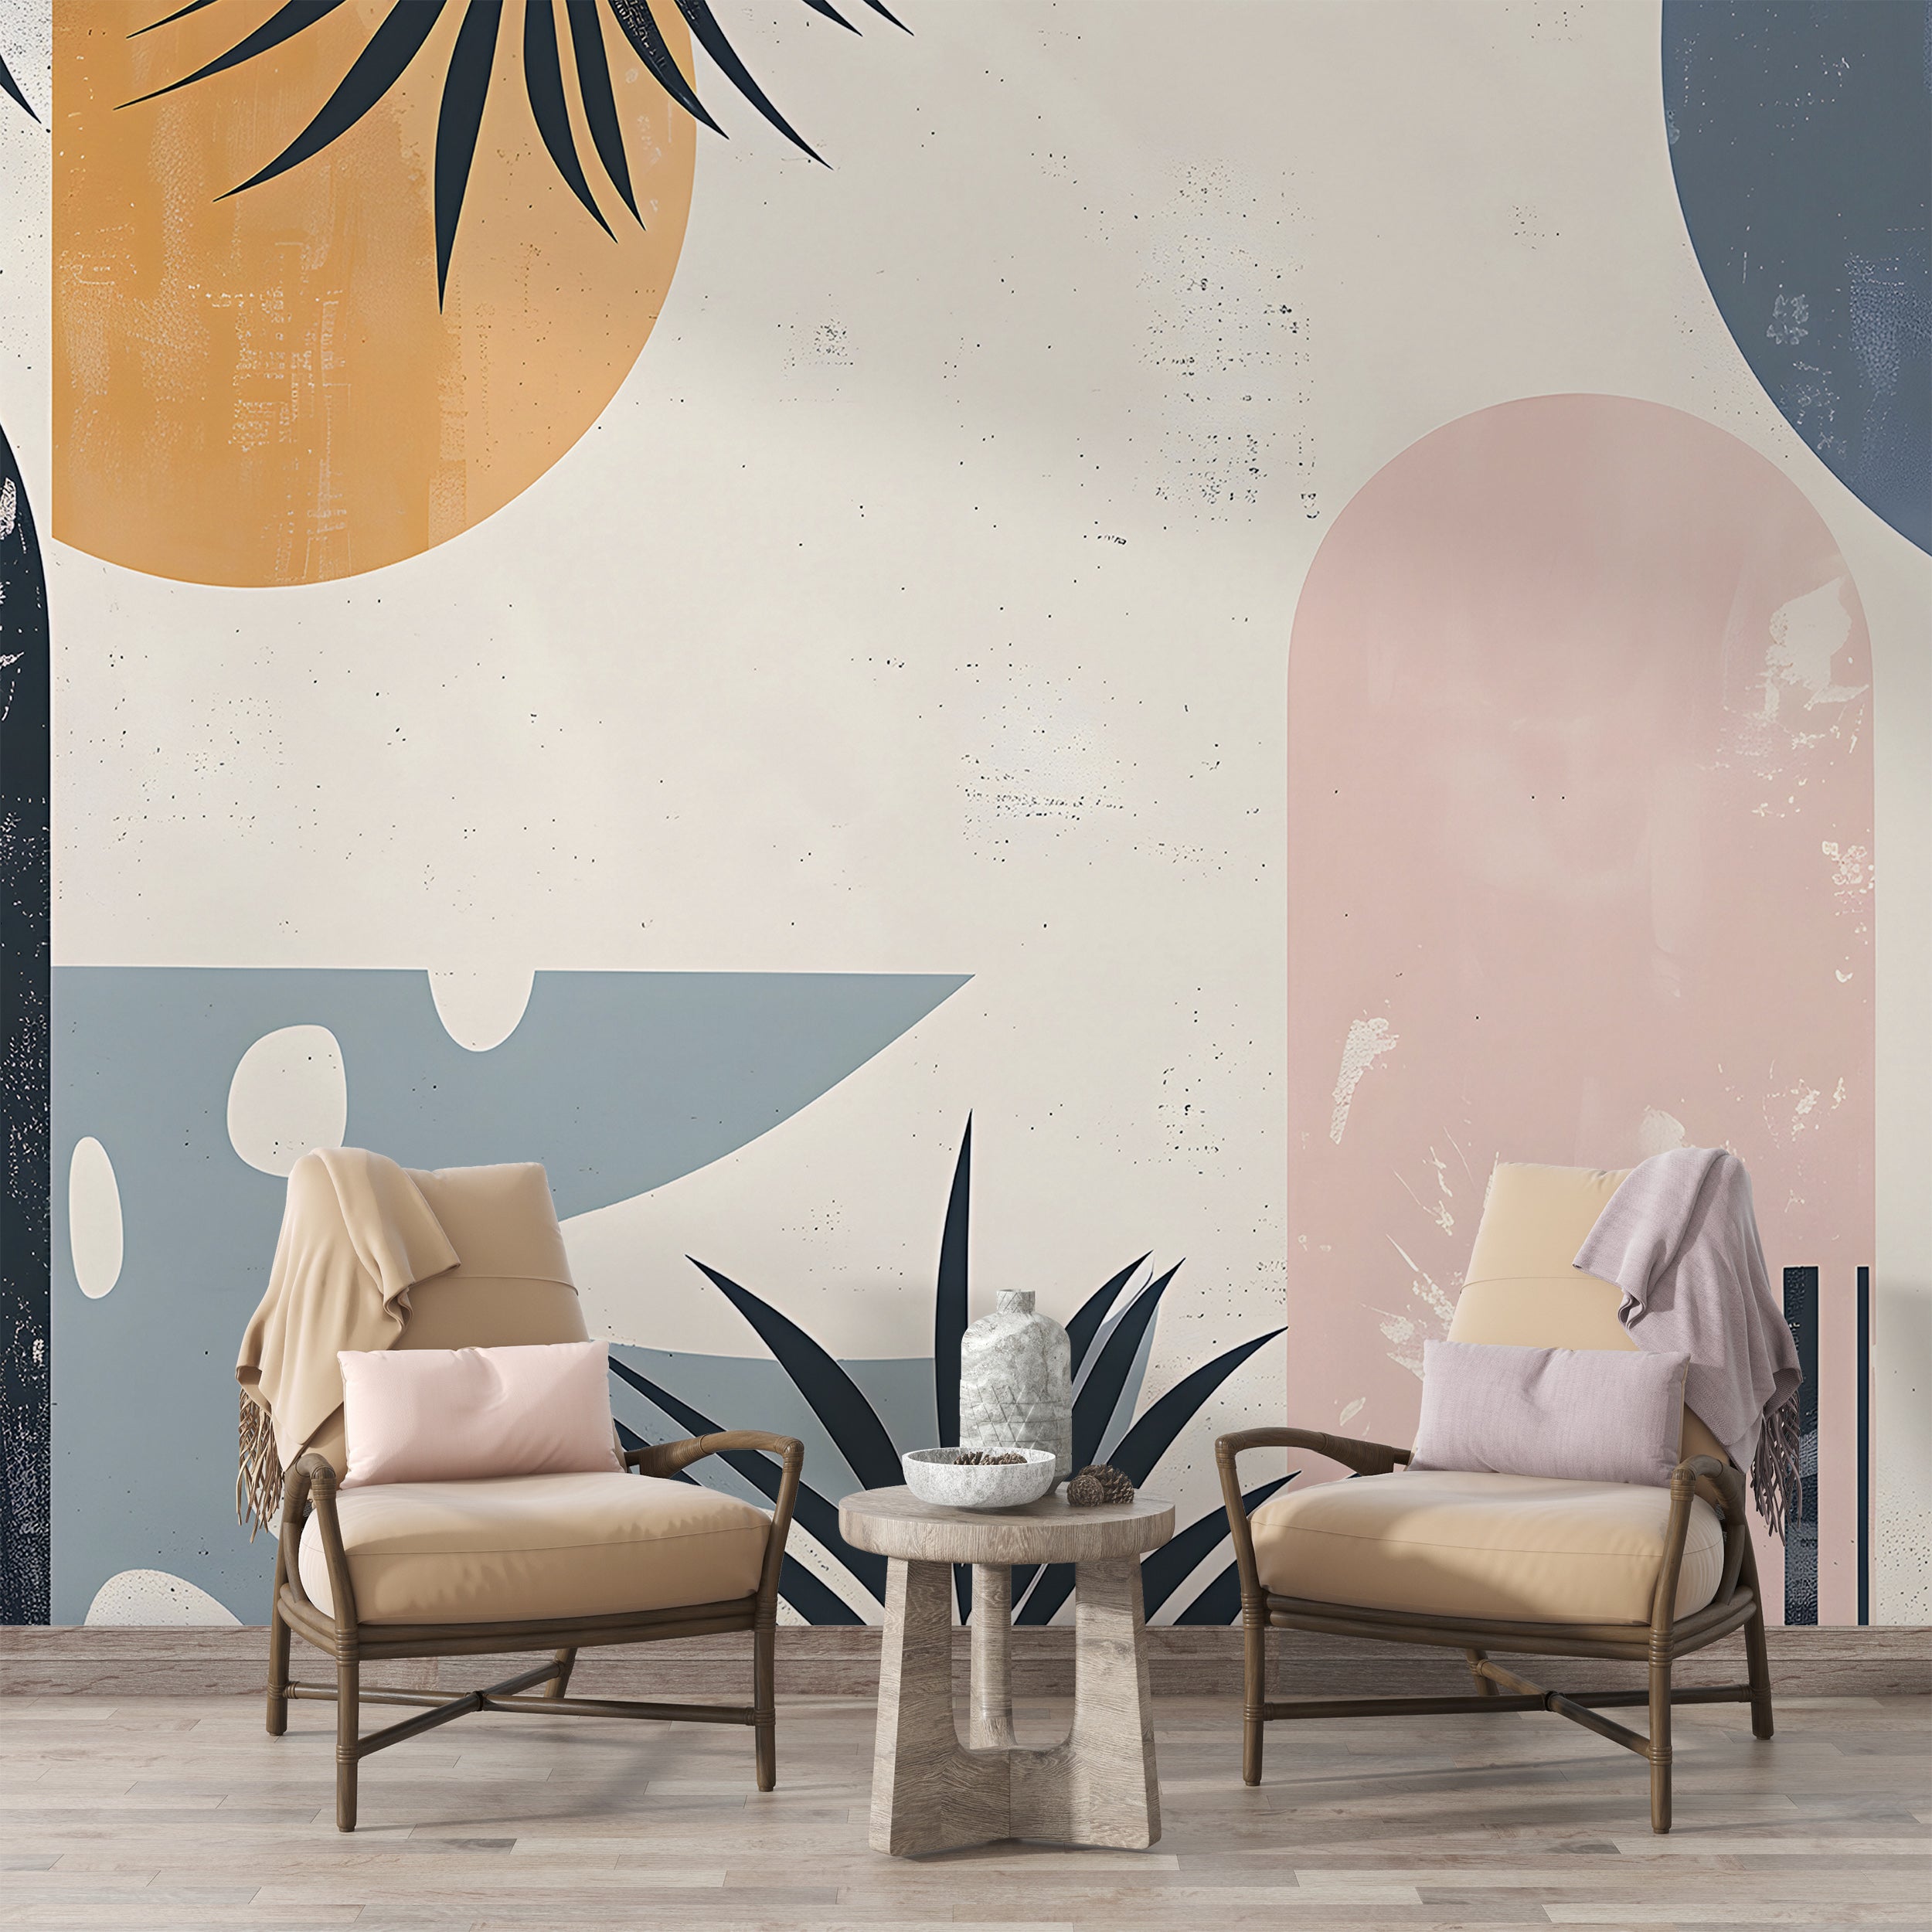 Pastel Colors Geometric Wallpaper for Modern Interiors Peel and Stick Abstract Shapes Wall Mural